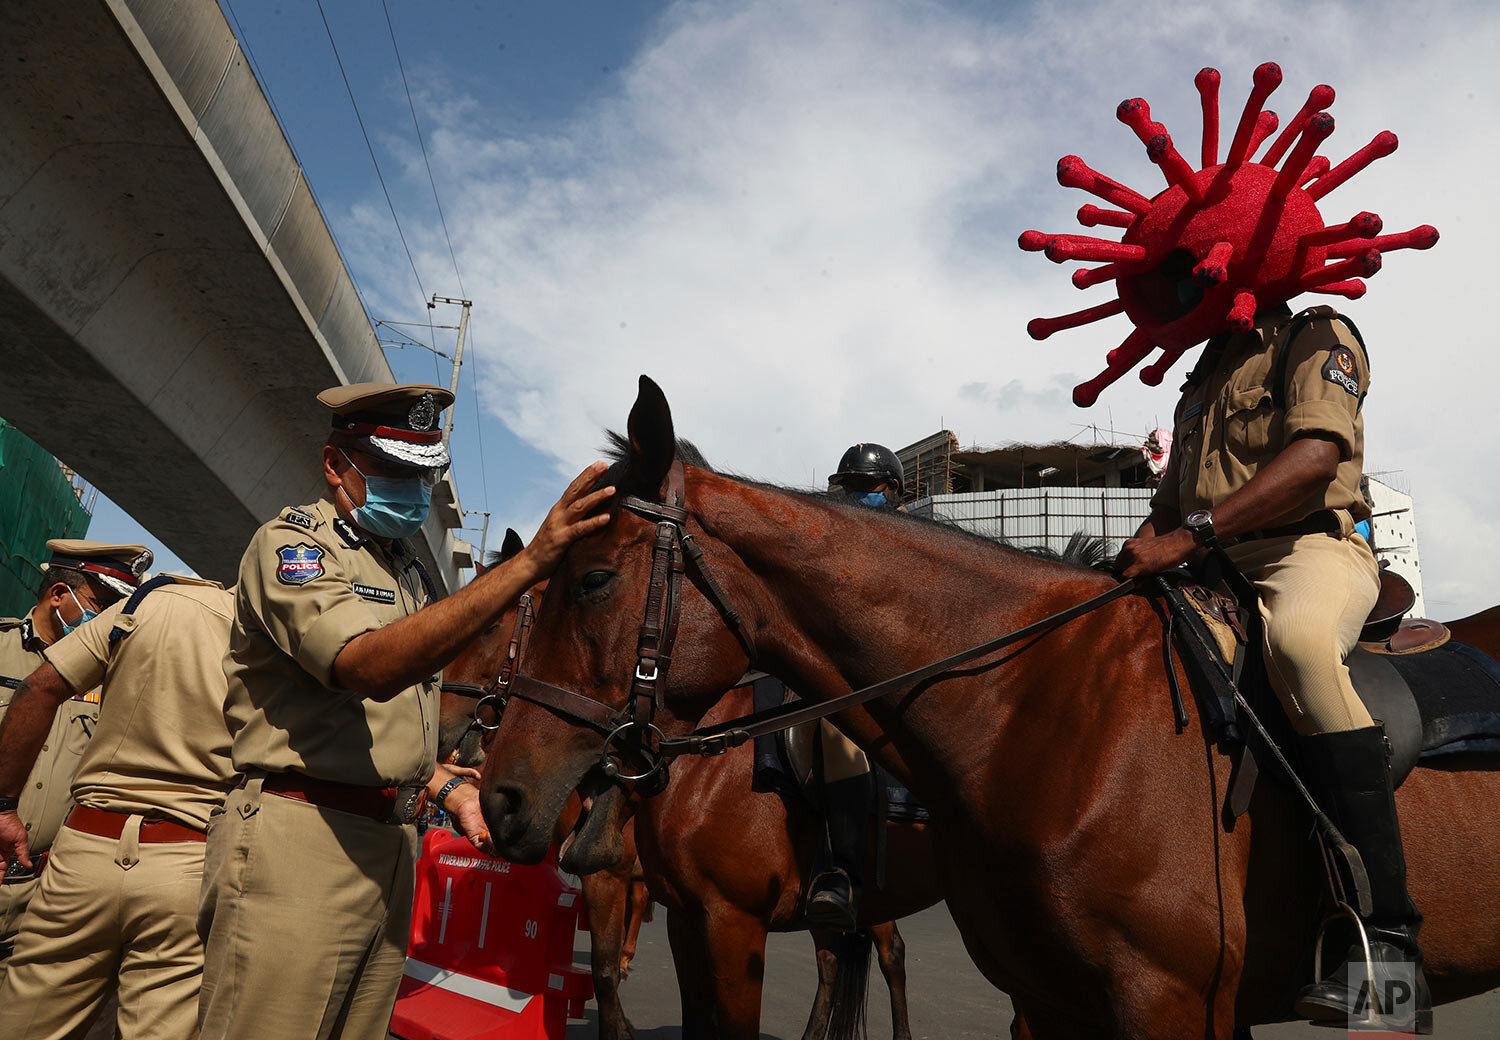  A policeman rides a horse wearing a virus-themed helmet during a COVID-19 awareness drive in Hyderabad, India, Tuesday, June 1, 2021. (AP Photo/Mahesh Kumar A.) 